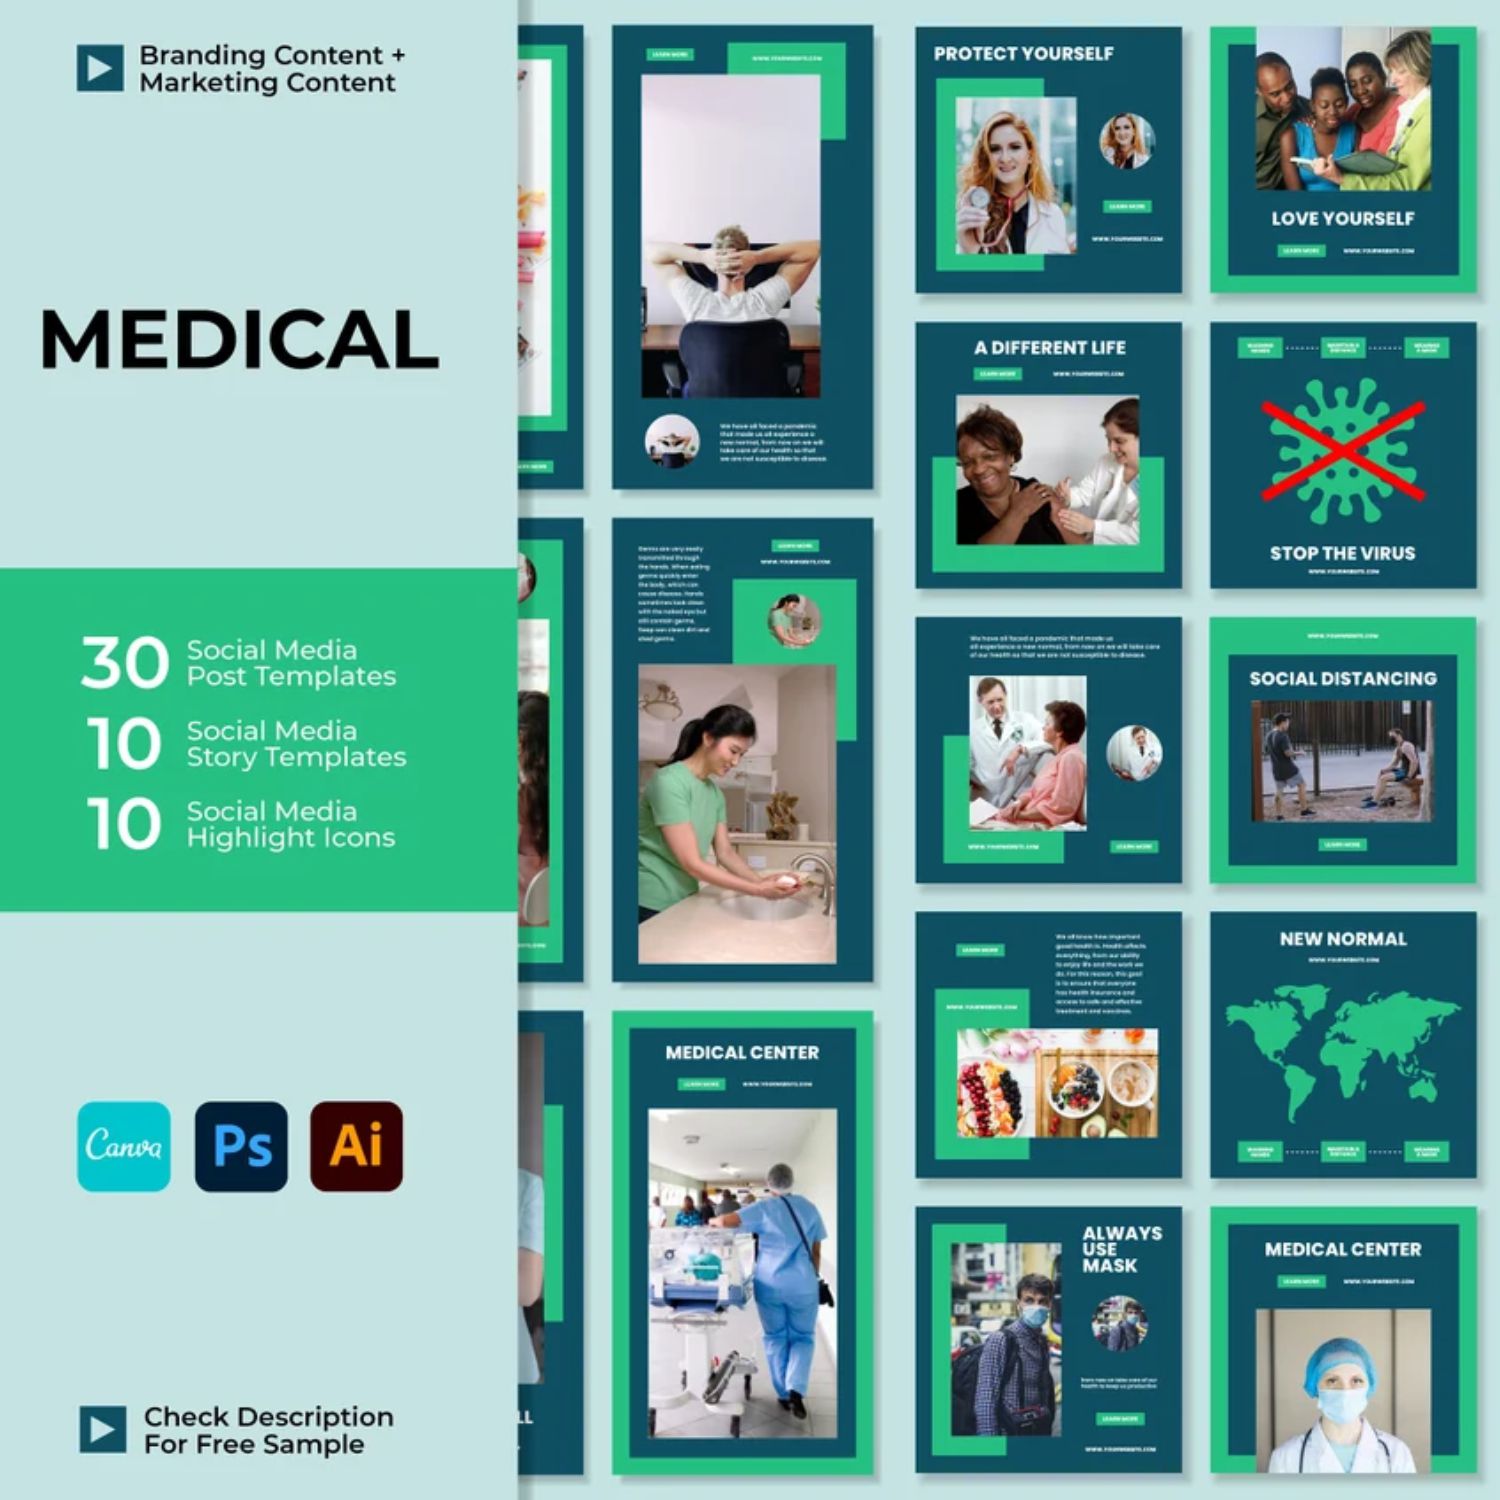 Medical Social Media Templates For Instagram Stories And Posts Cover Image.